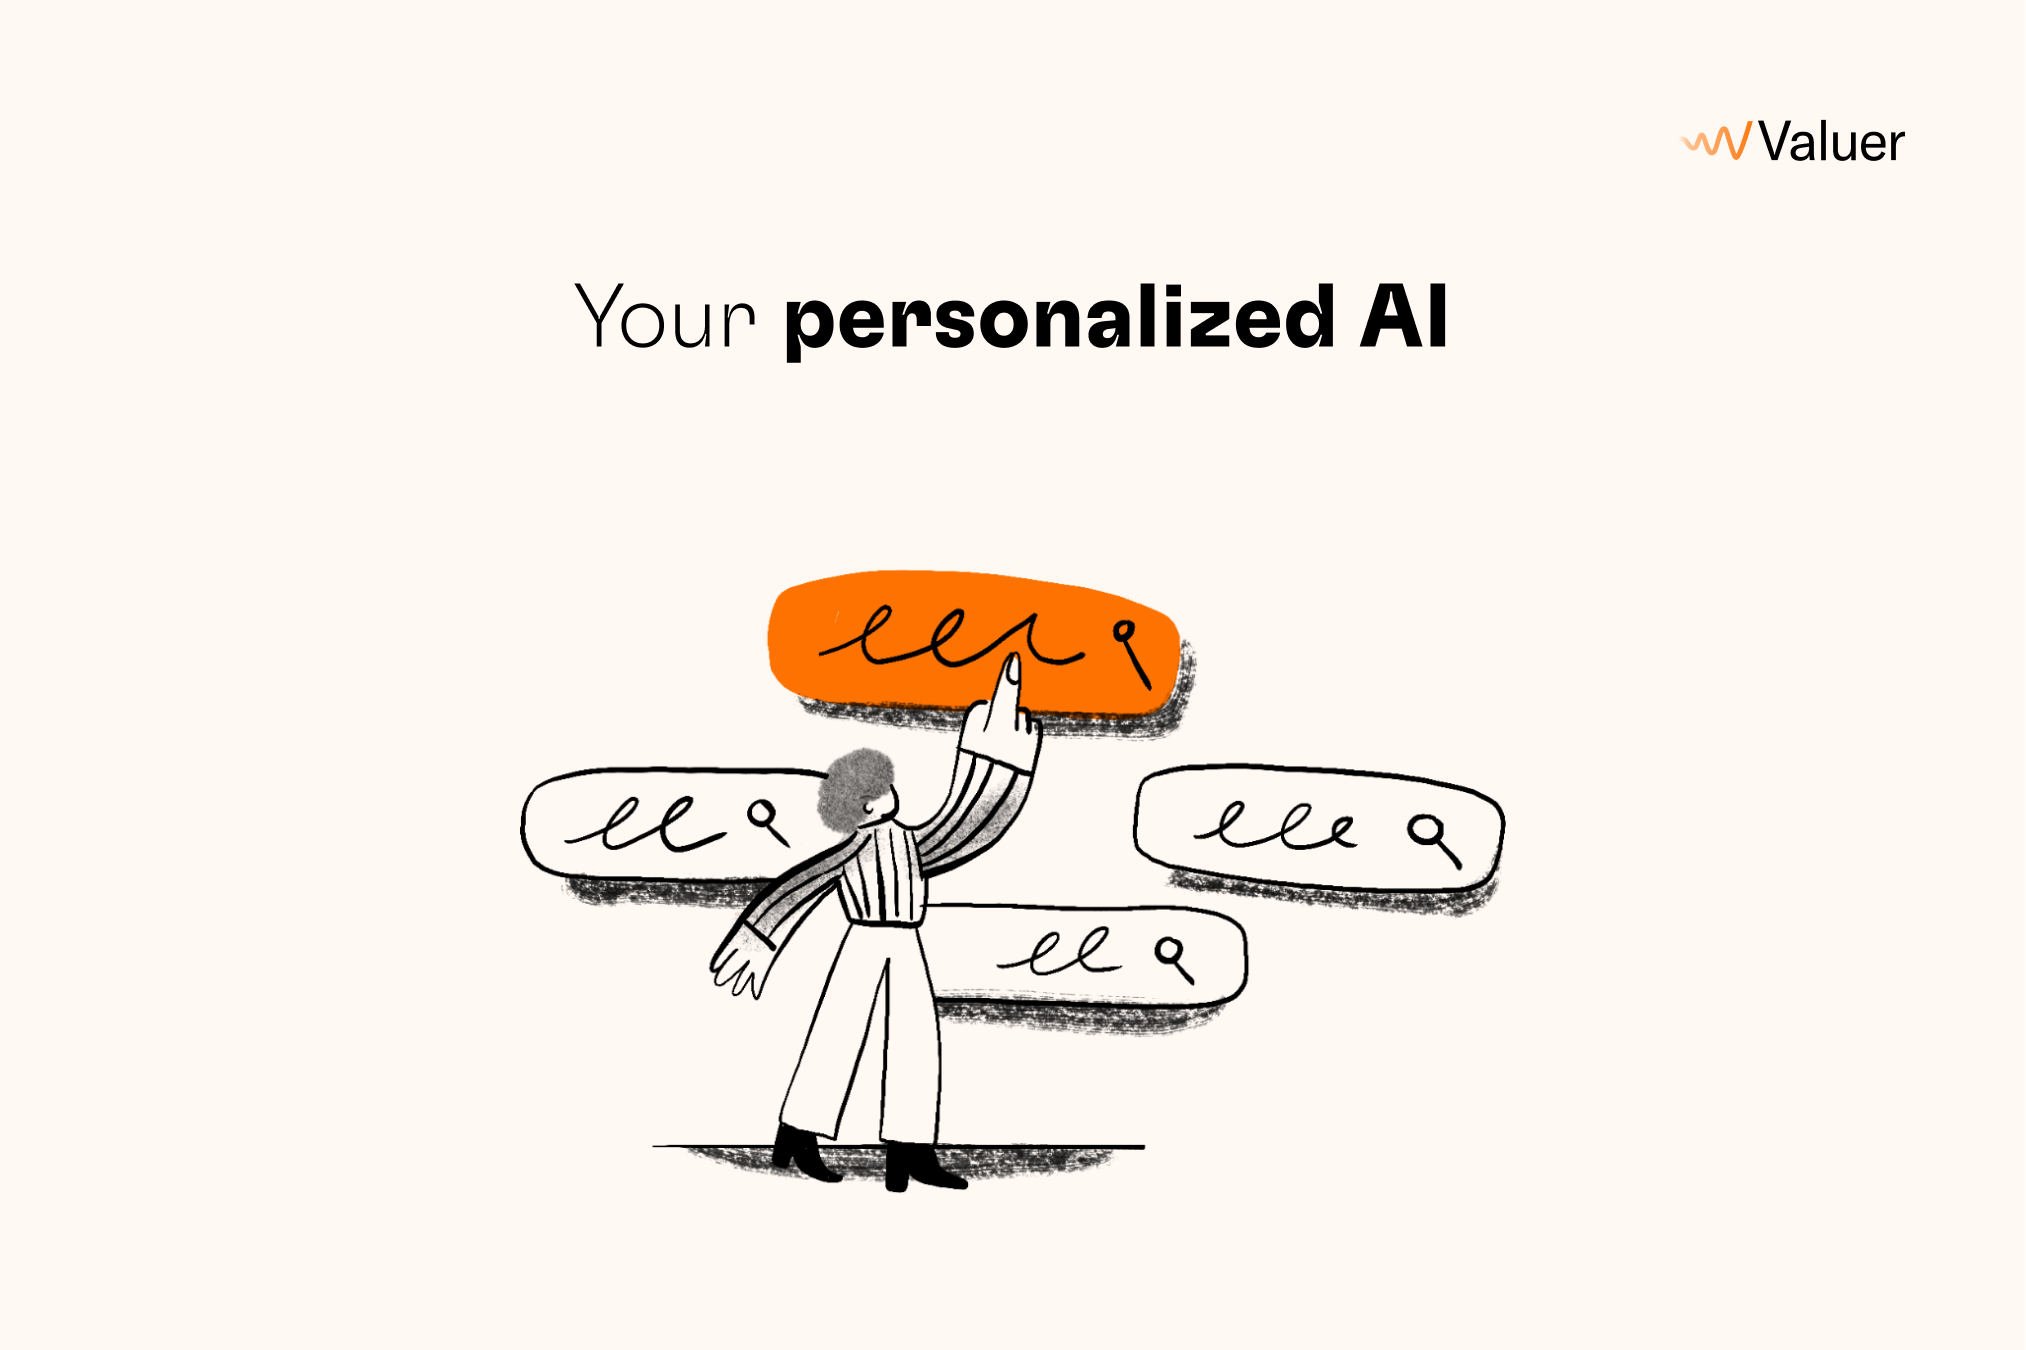 Your personalized AI